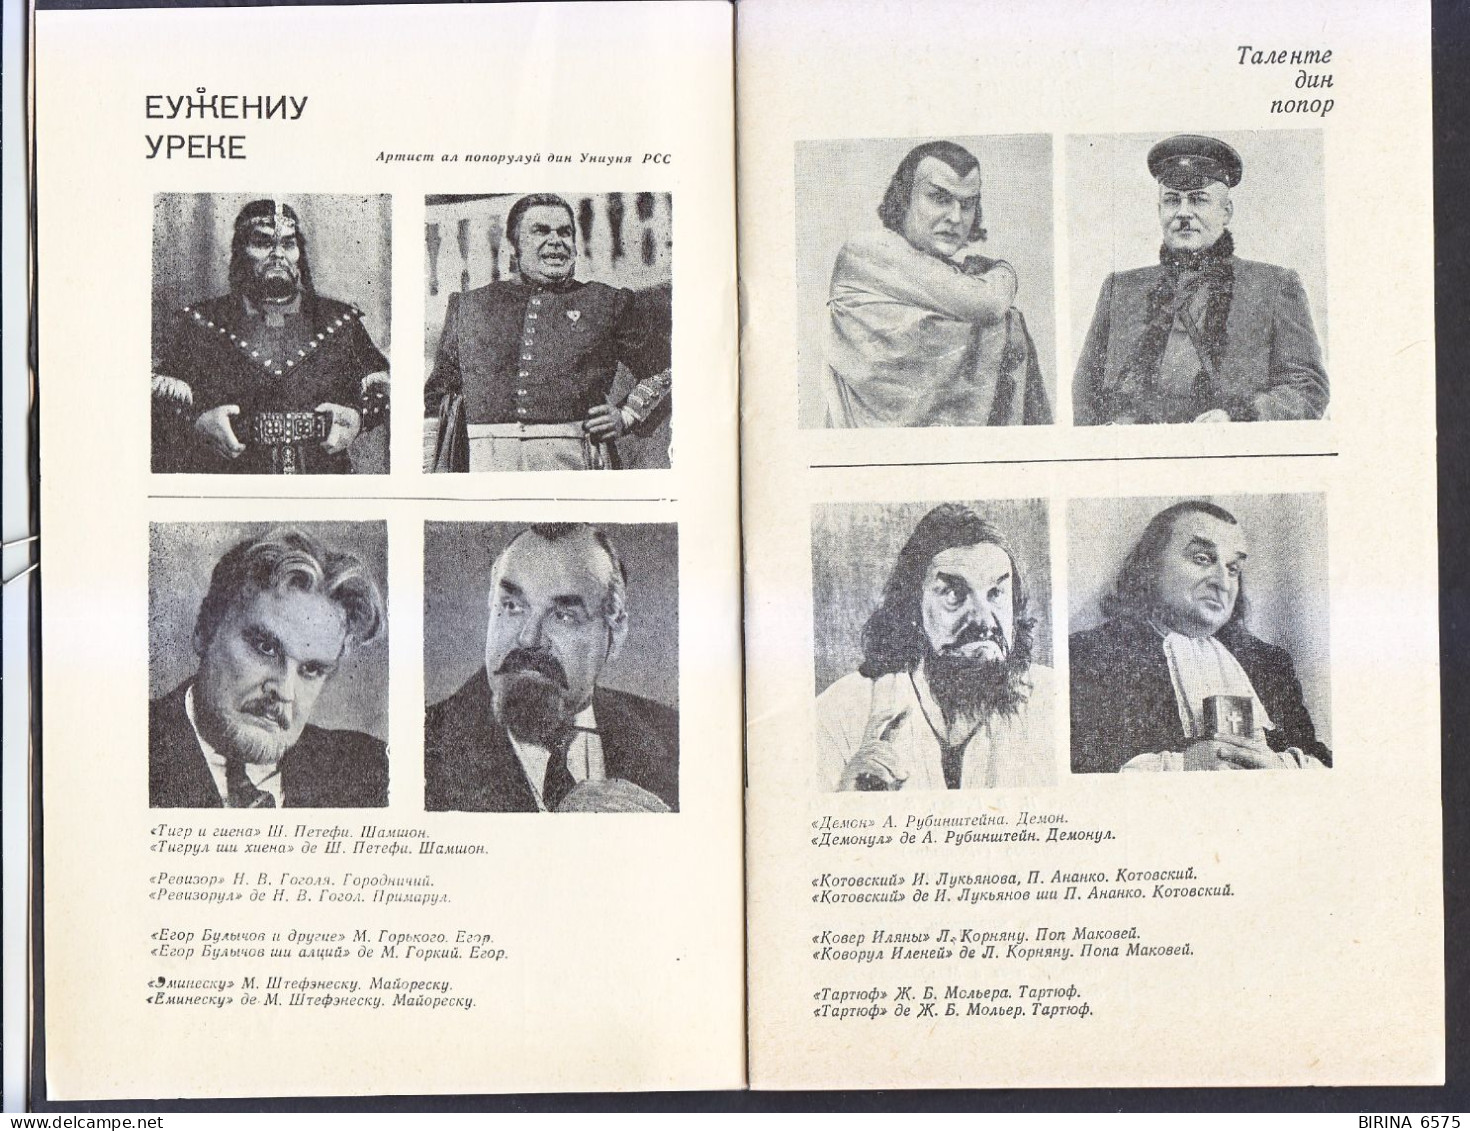 BROCHURE. PEOPLE'S ARTIST OF THE USSR. E. UREKE. CHISINAU. IN RUSSIAN AND MOLDOVAN. - 7-30-i - Theatre